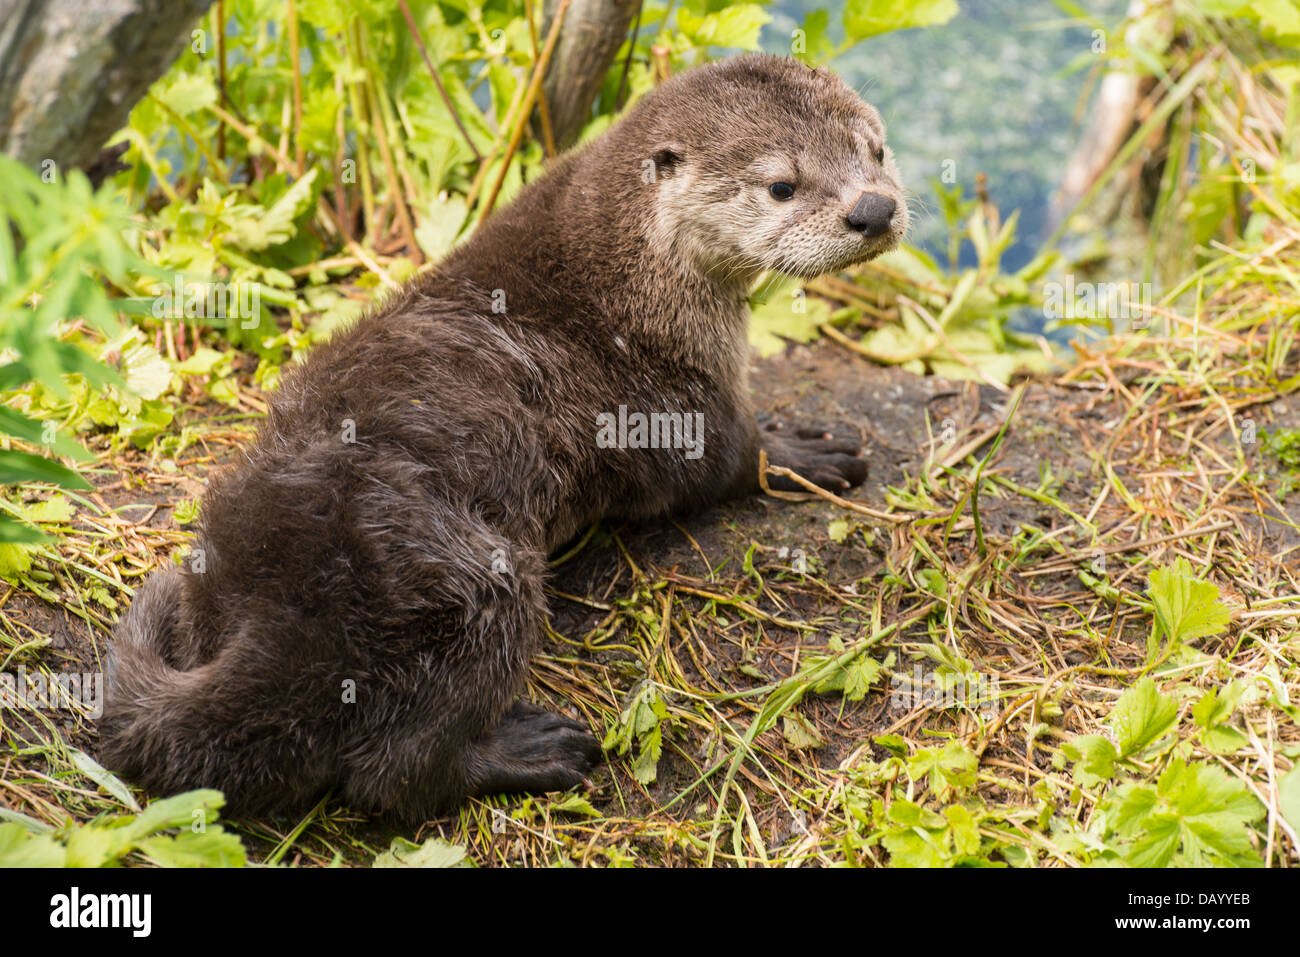 Stock photo of a North American river otter pup. Stock Photo